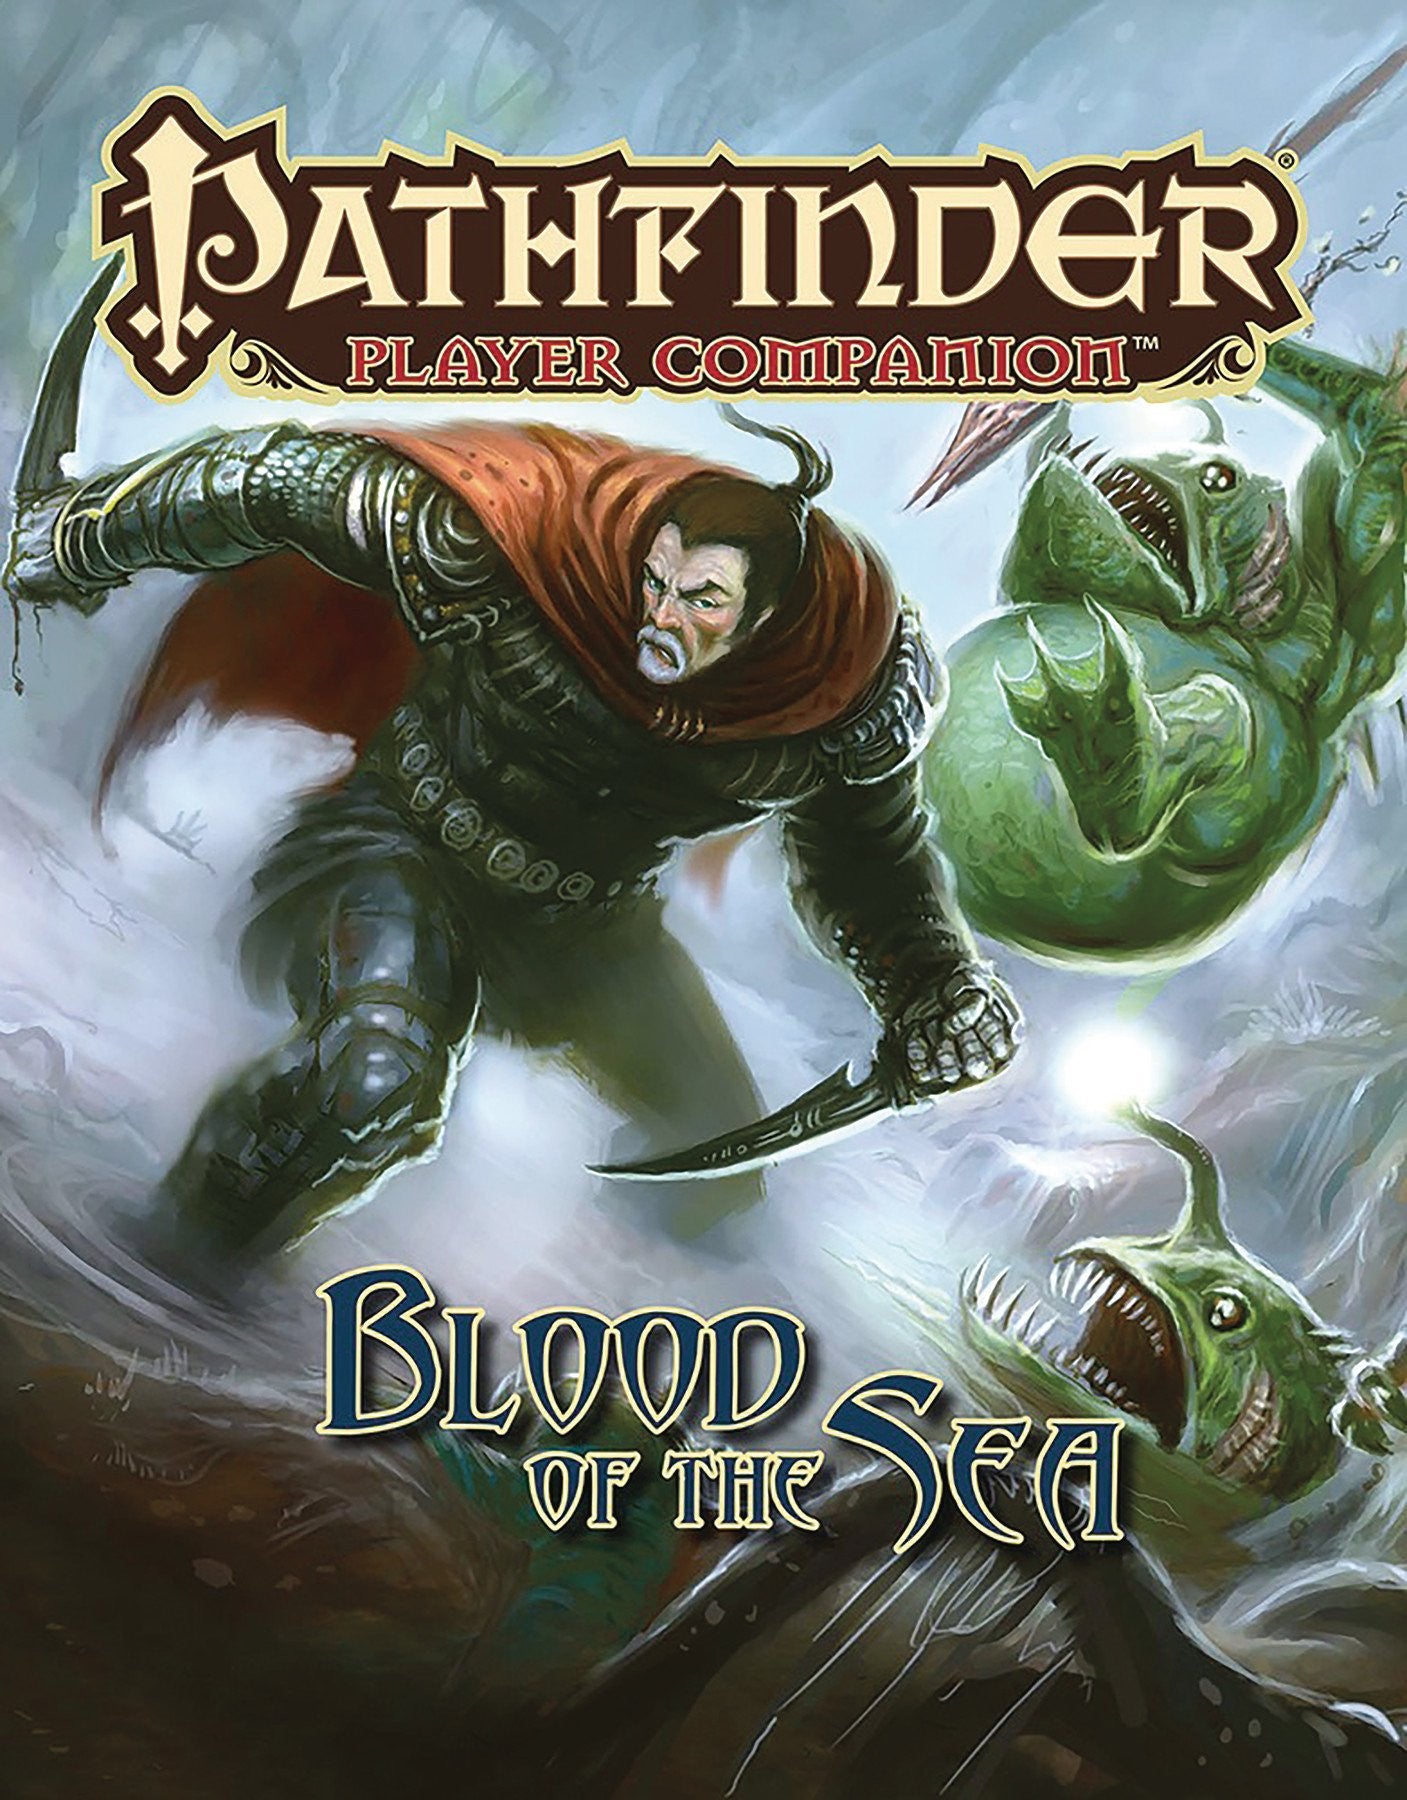 PATHFINDER PLAYER COMPANION BLOOD OF THE SEA SCCOVER